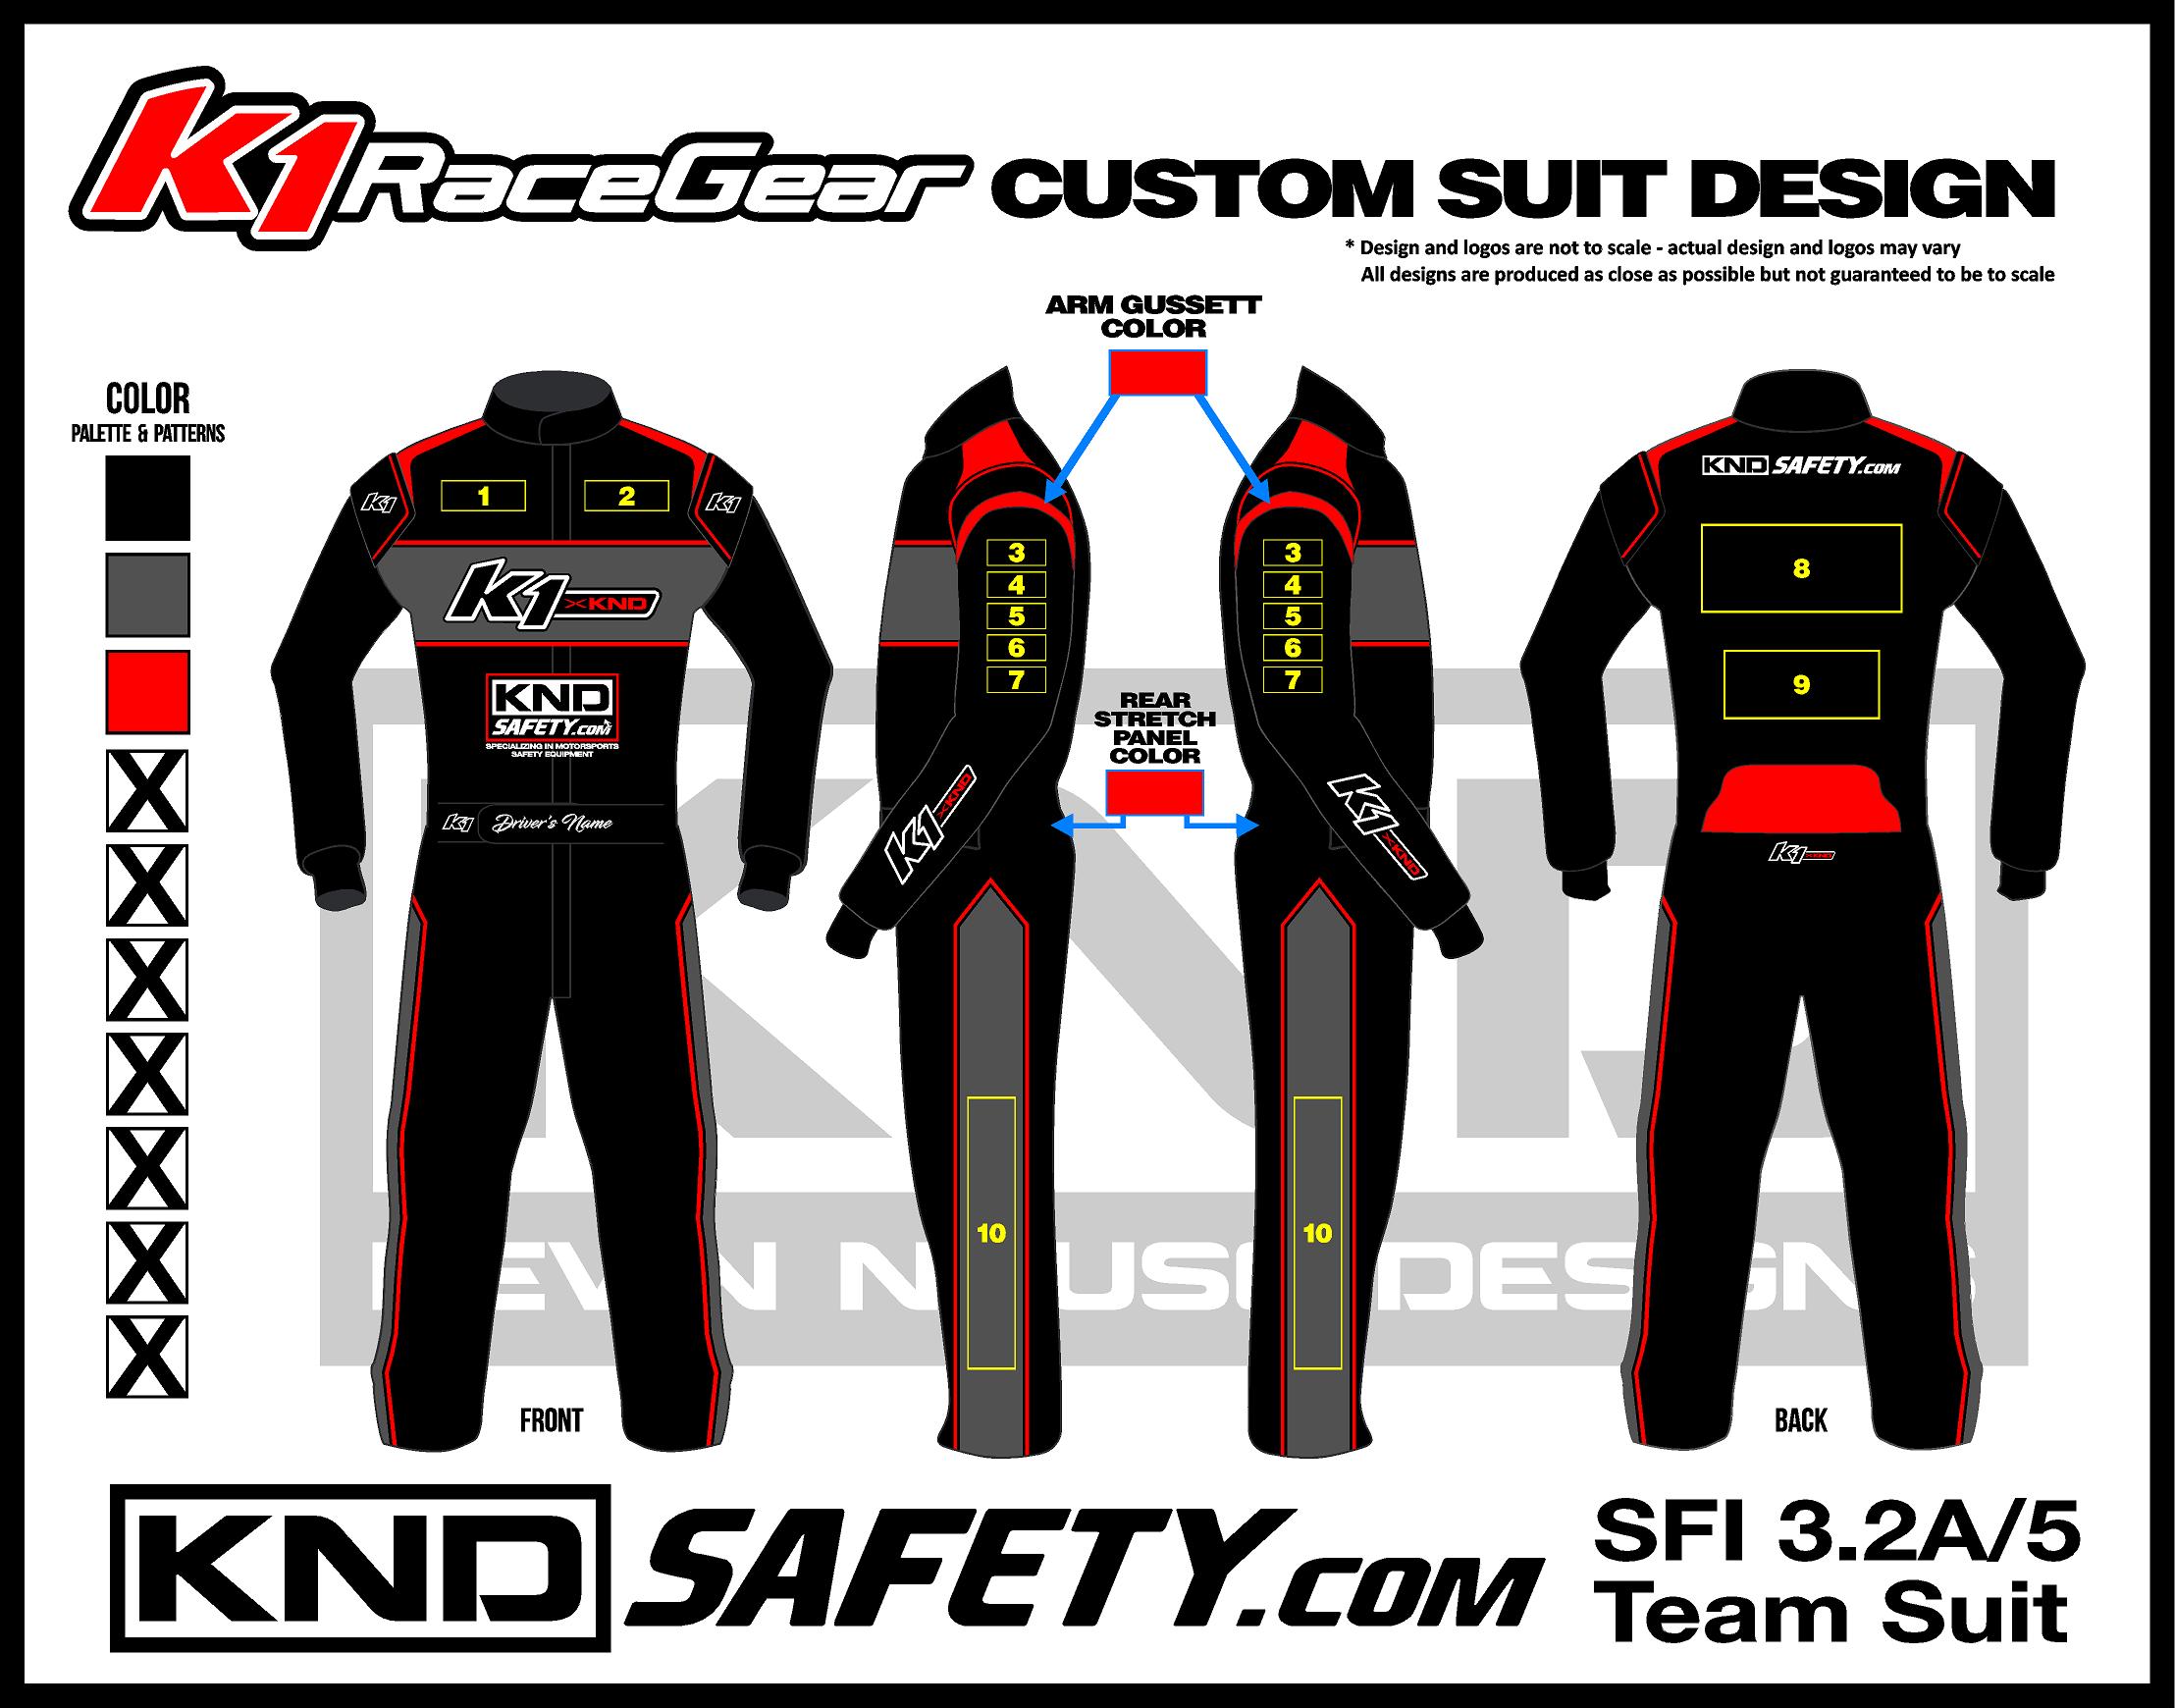 K1 Custom Race Suits (SFI Rated) - Best Pricing - KND Safety